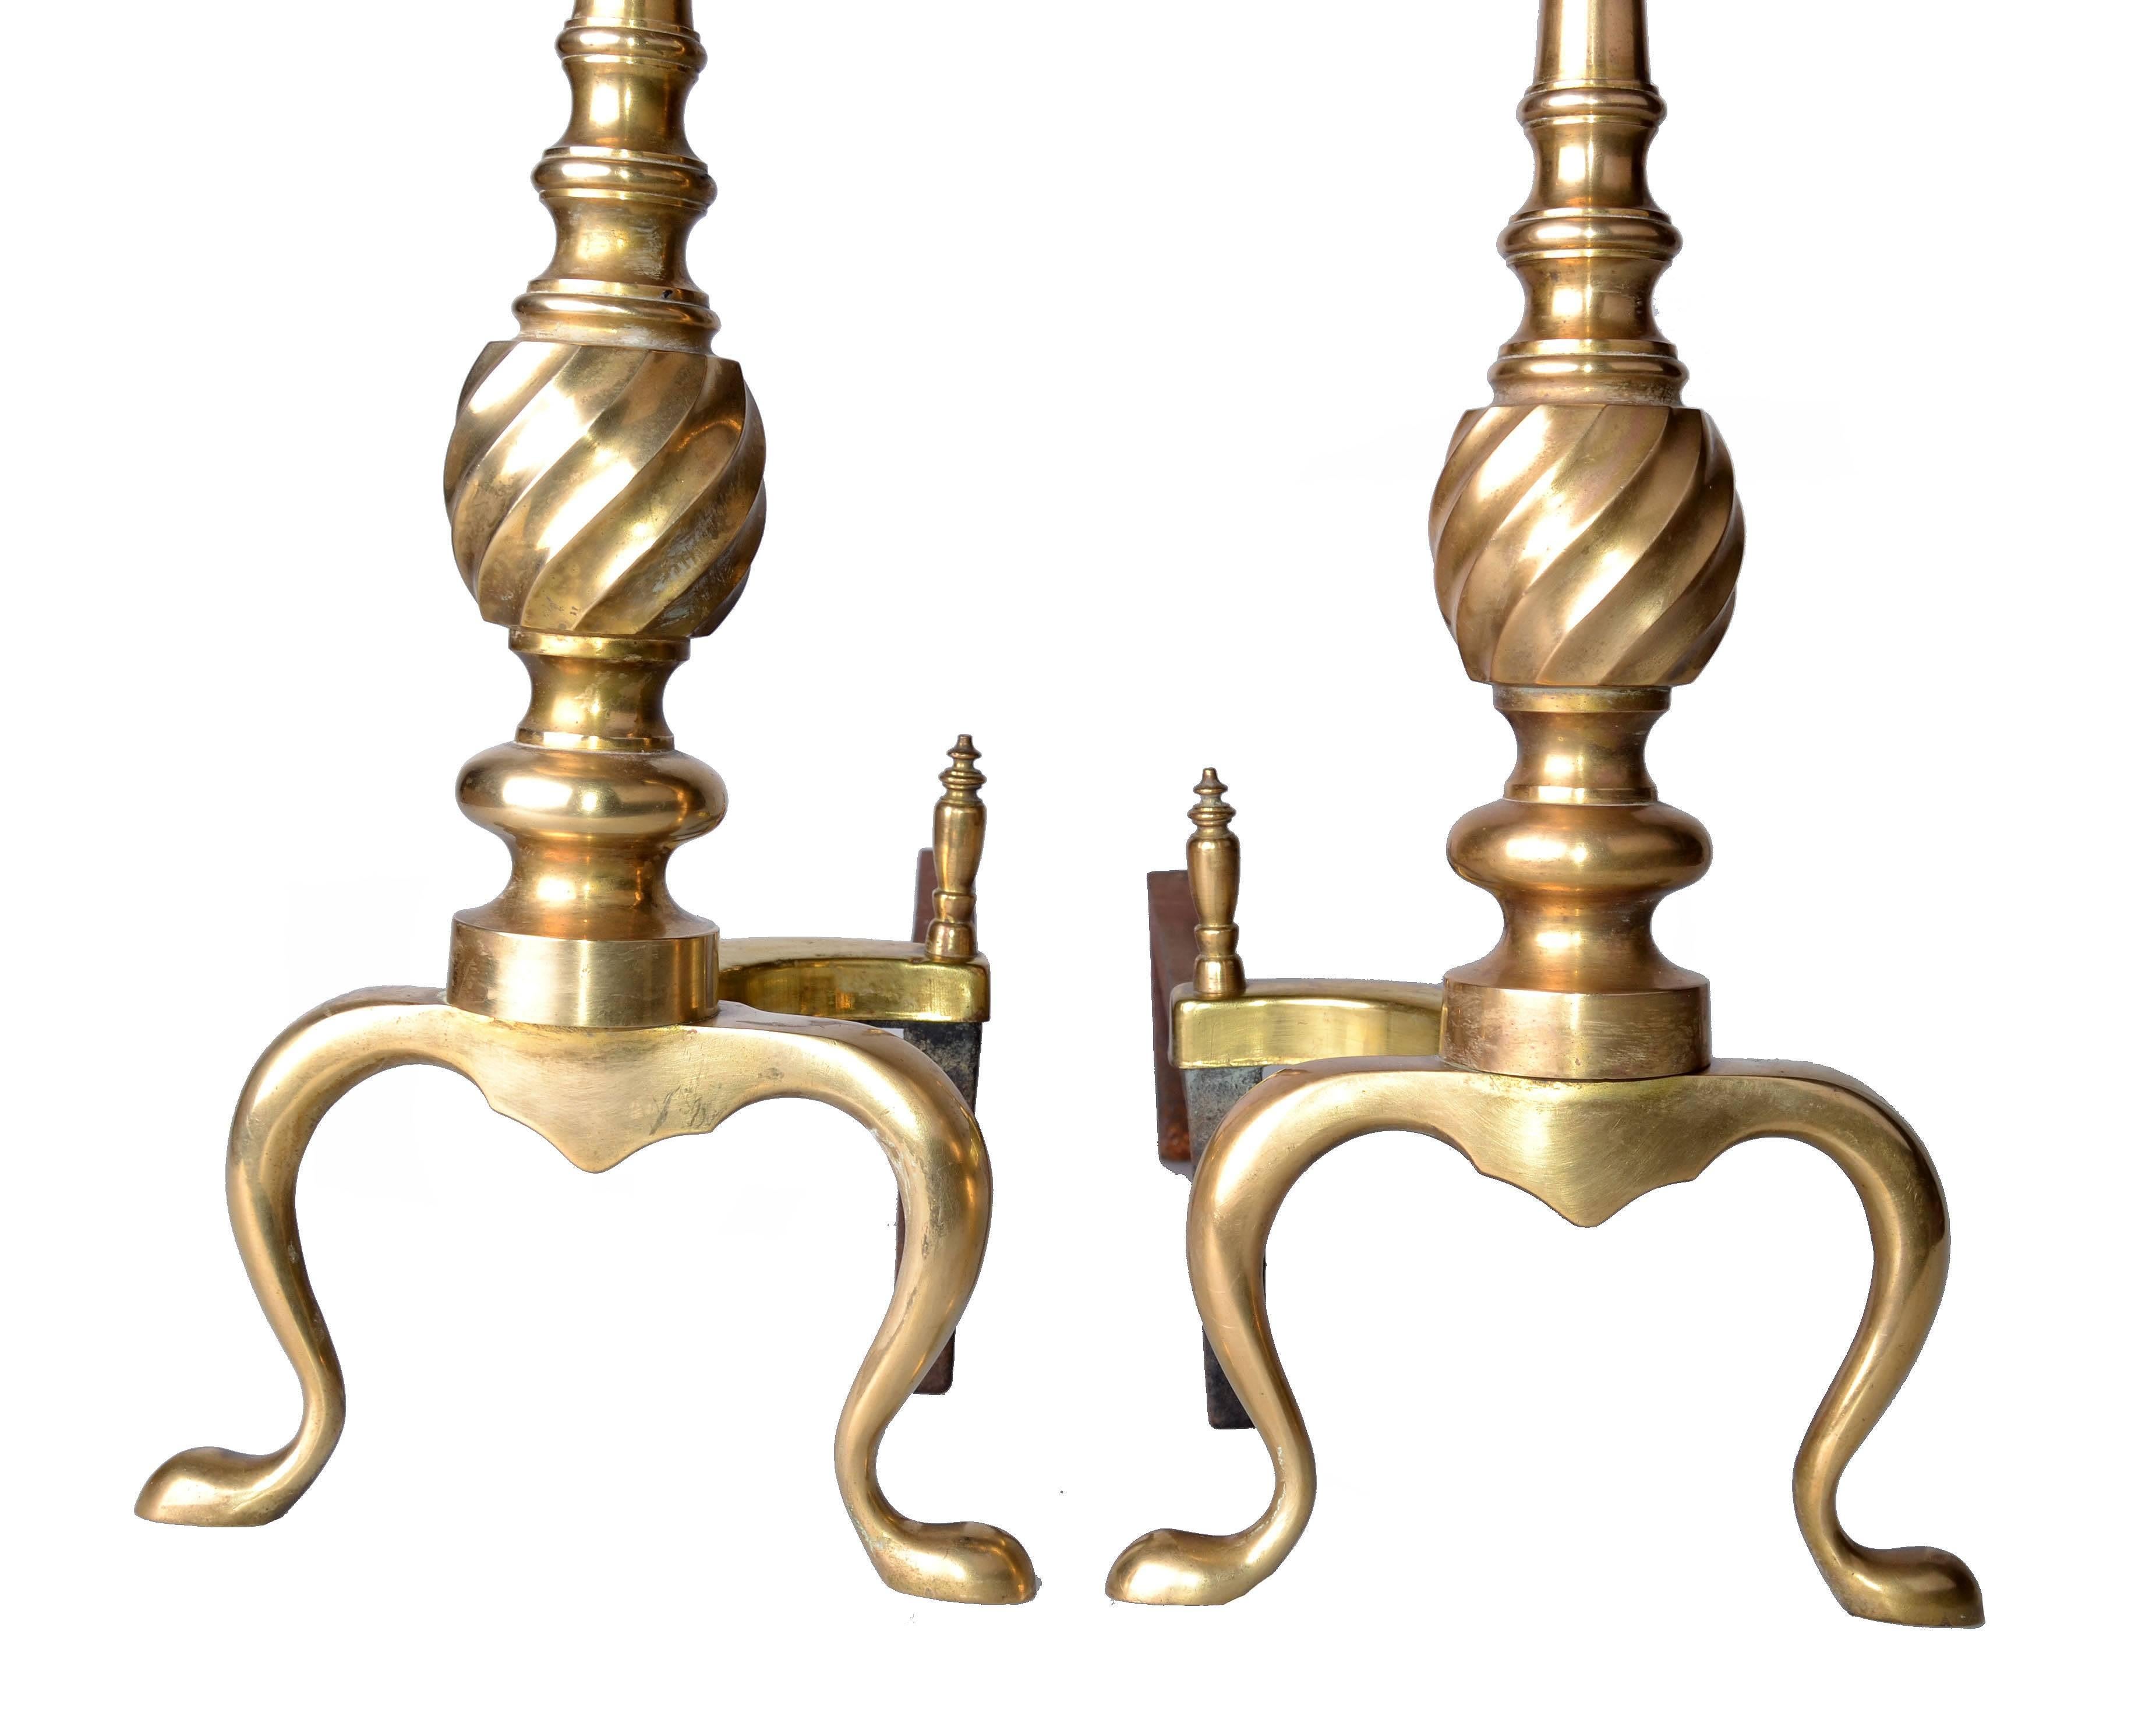 Polished Pair of Solid Brass Andirons